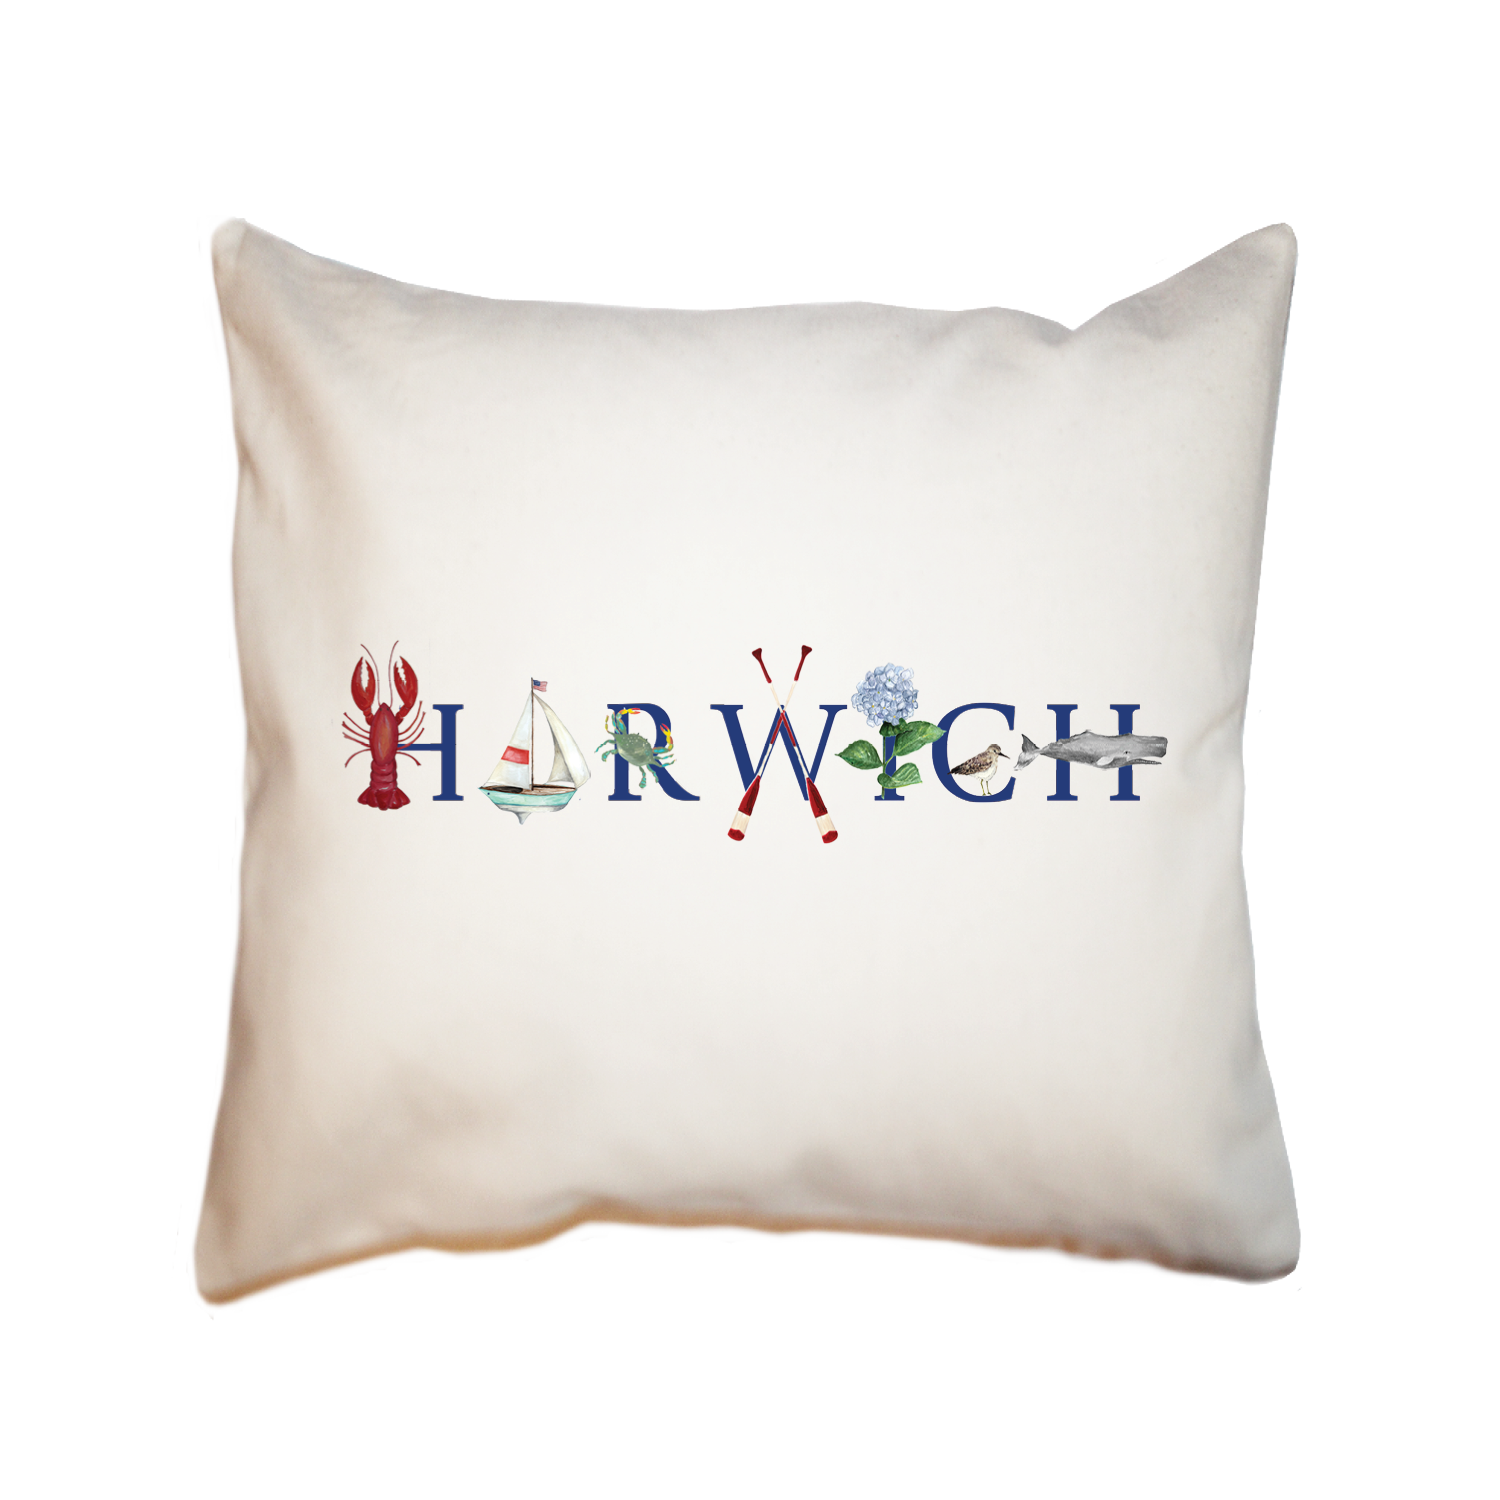 harwich square pillow